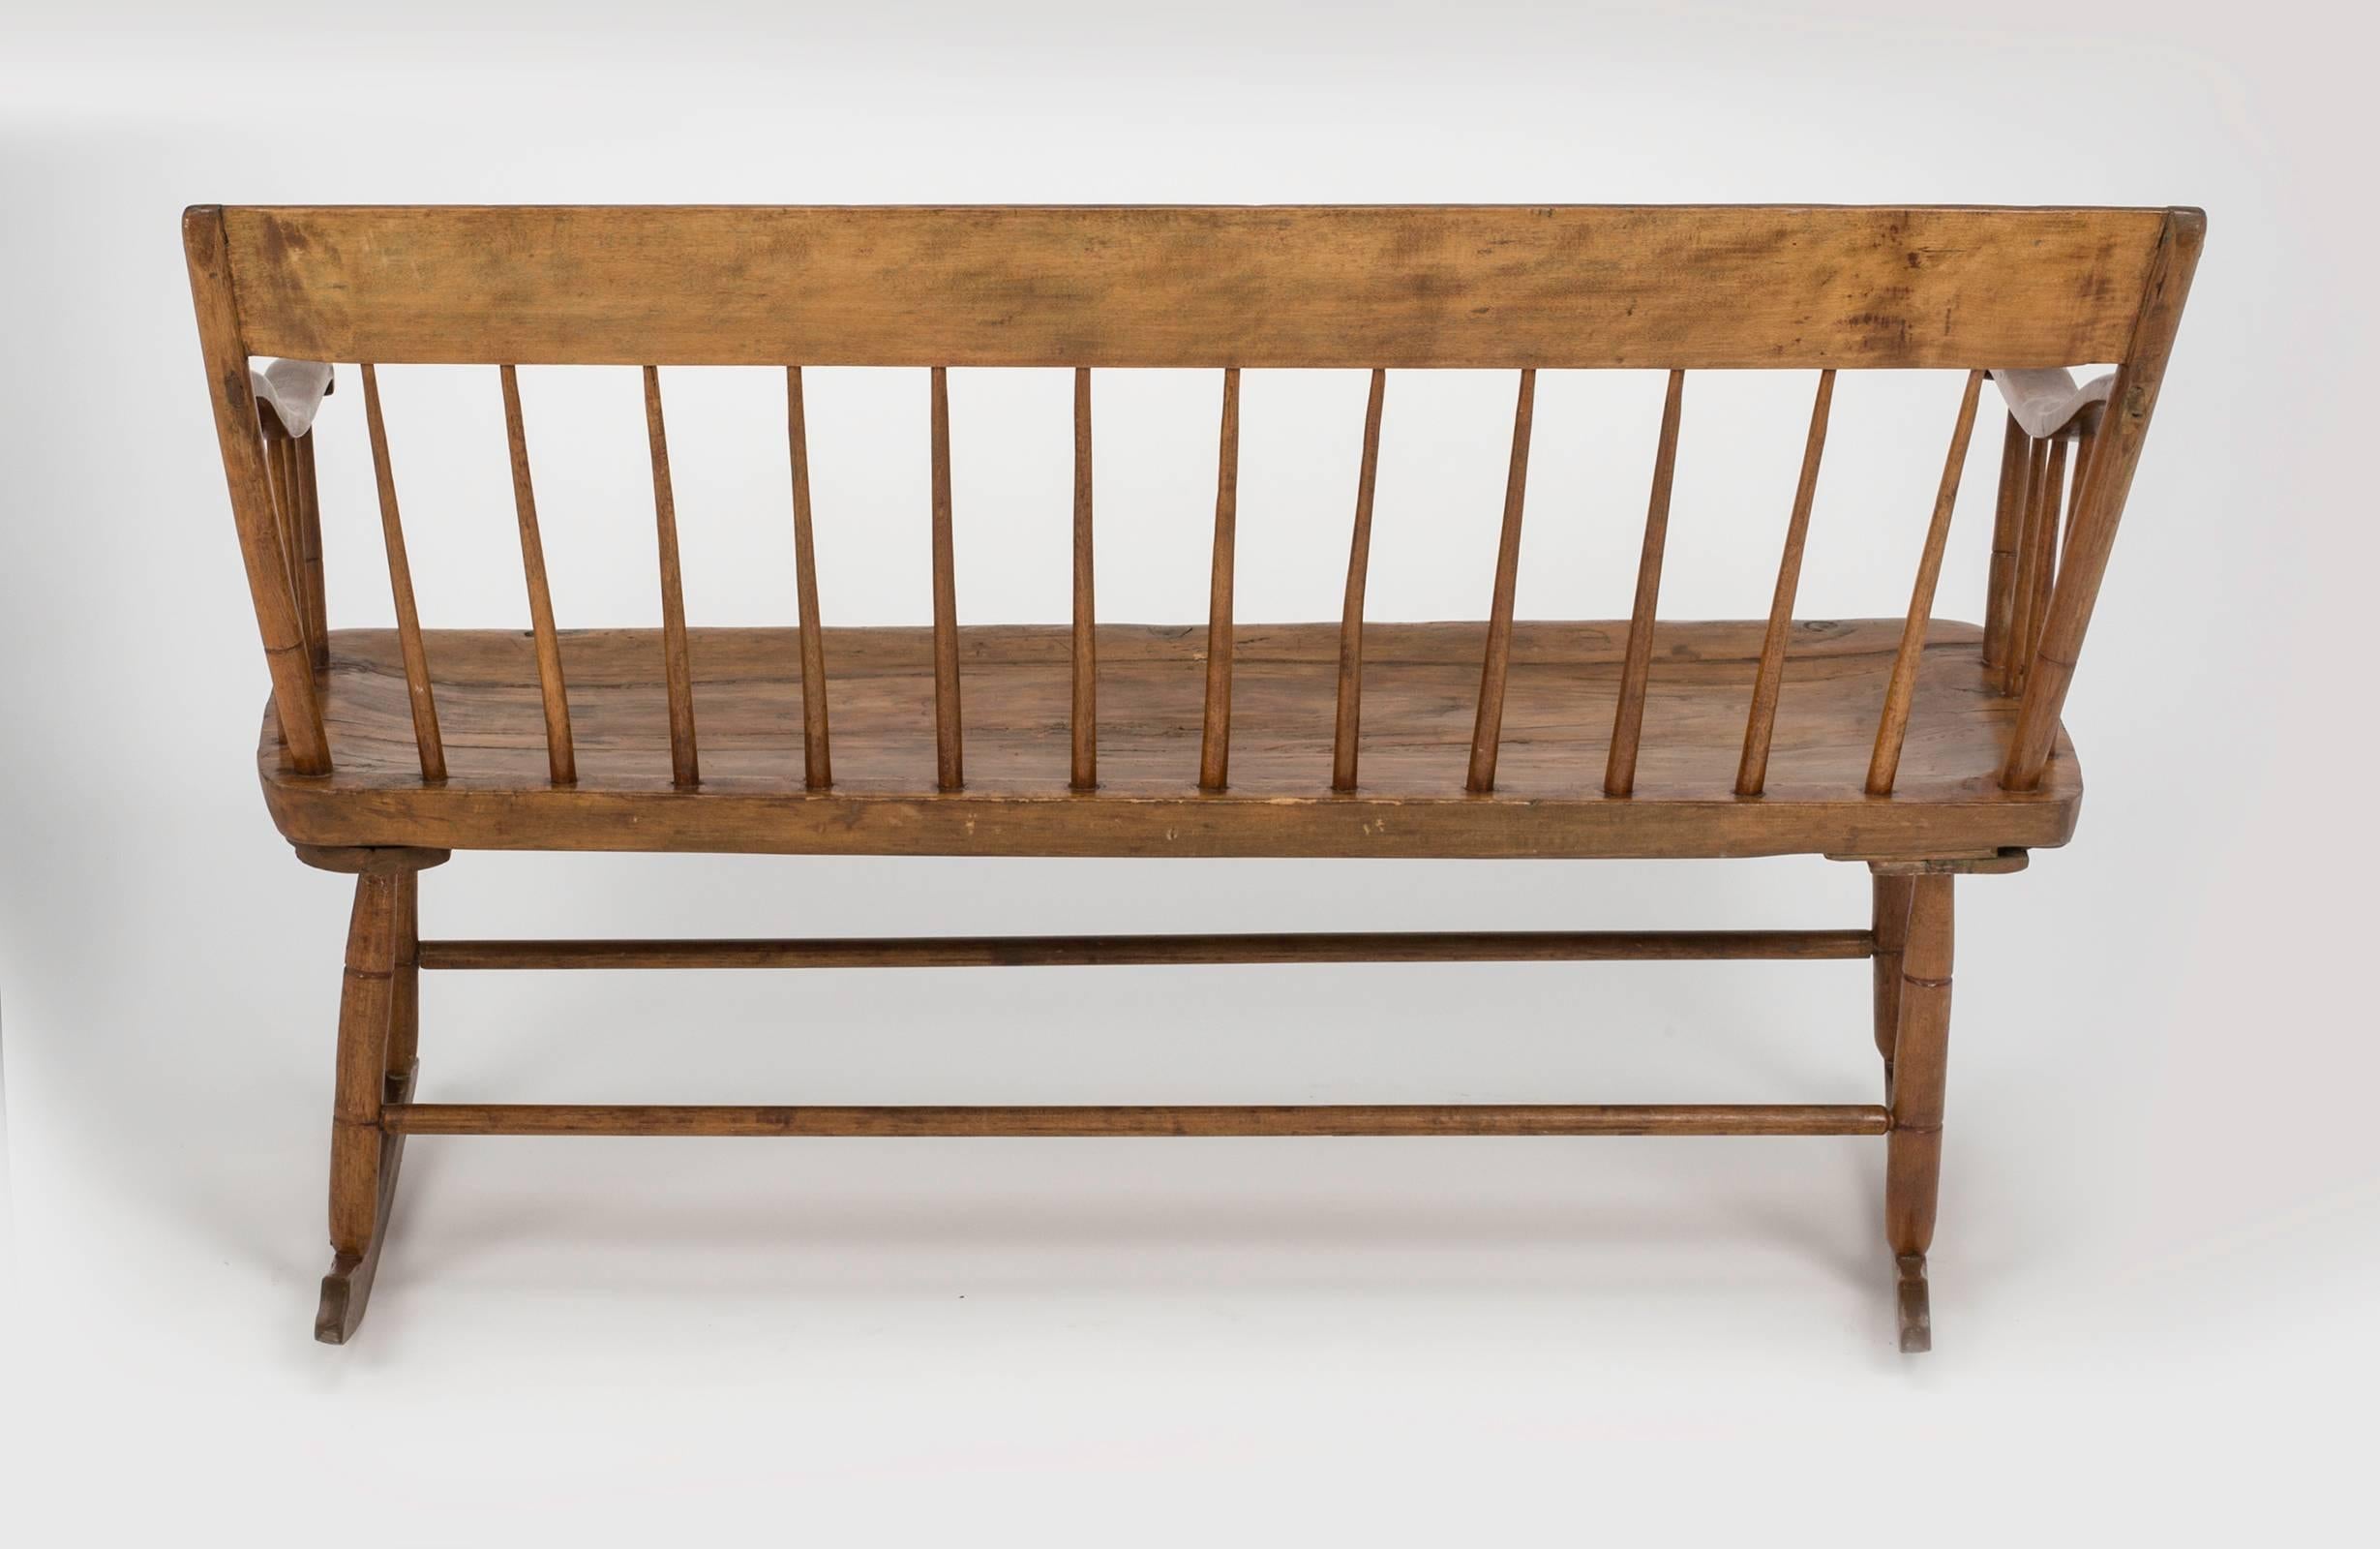 Late 19th Century Early American Primitive Rocking Bench